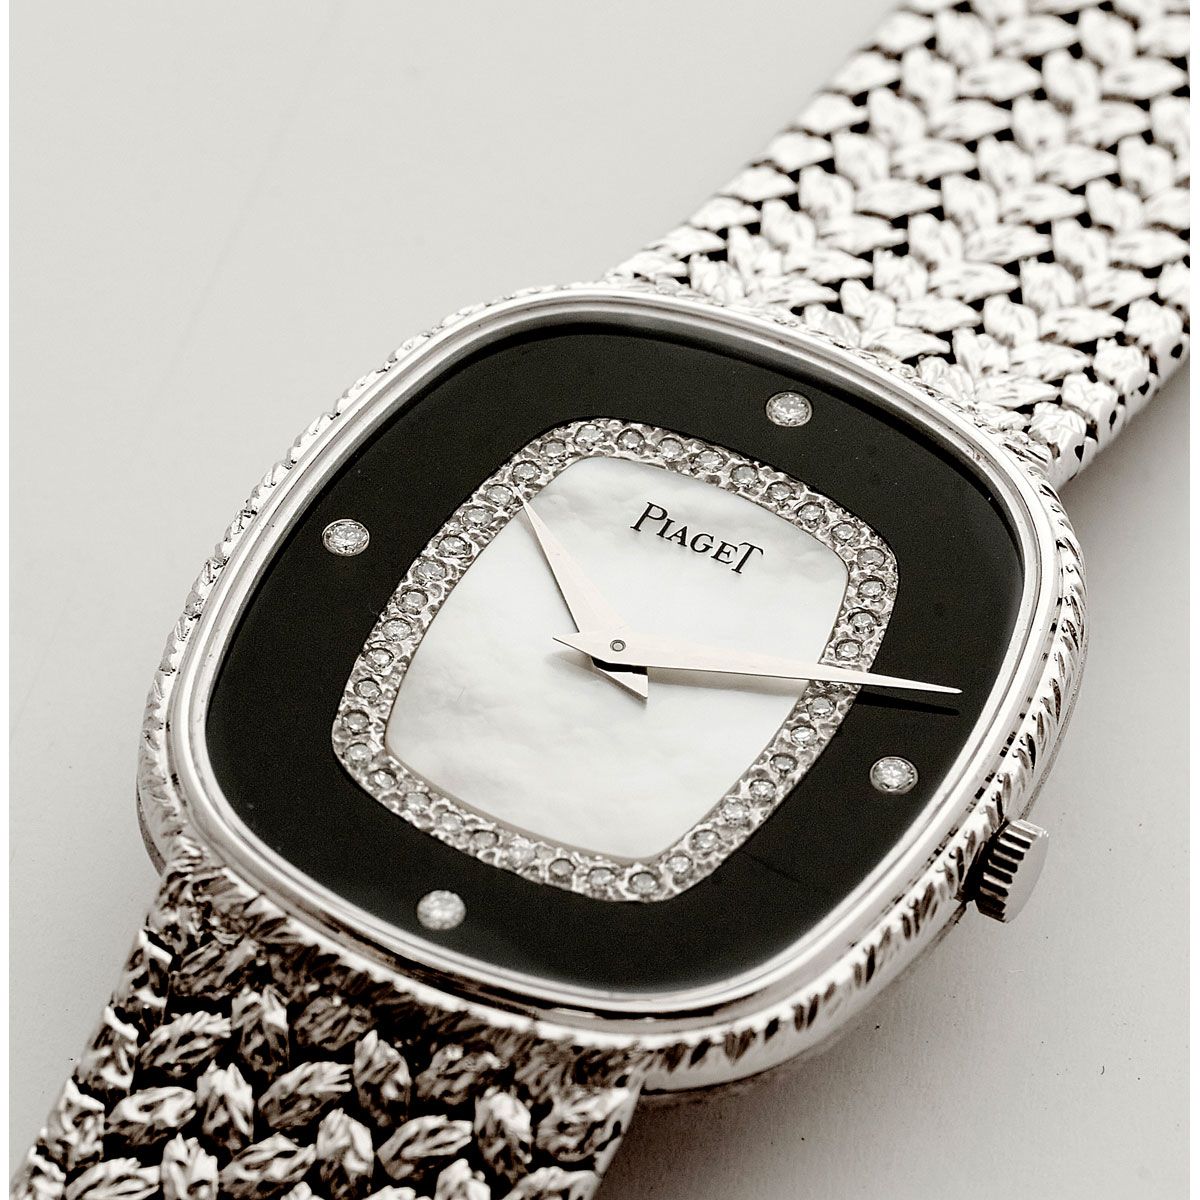 Null Piaget, Ref. 94438D2, No. 414471, circa 1980.

A spectacular ladies' watch &hellip;